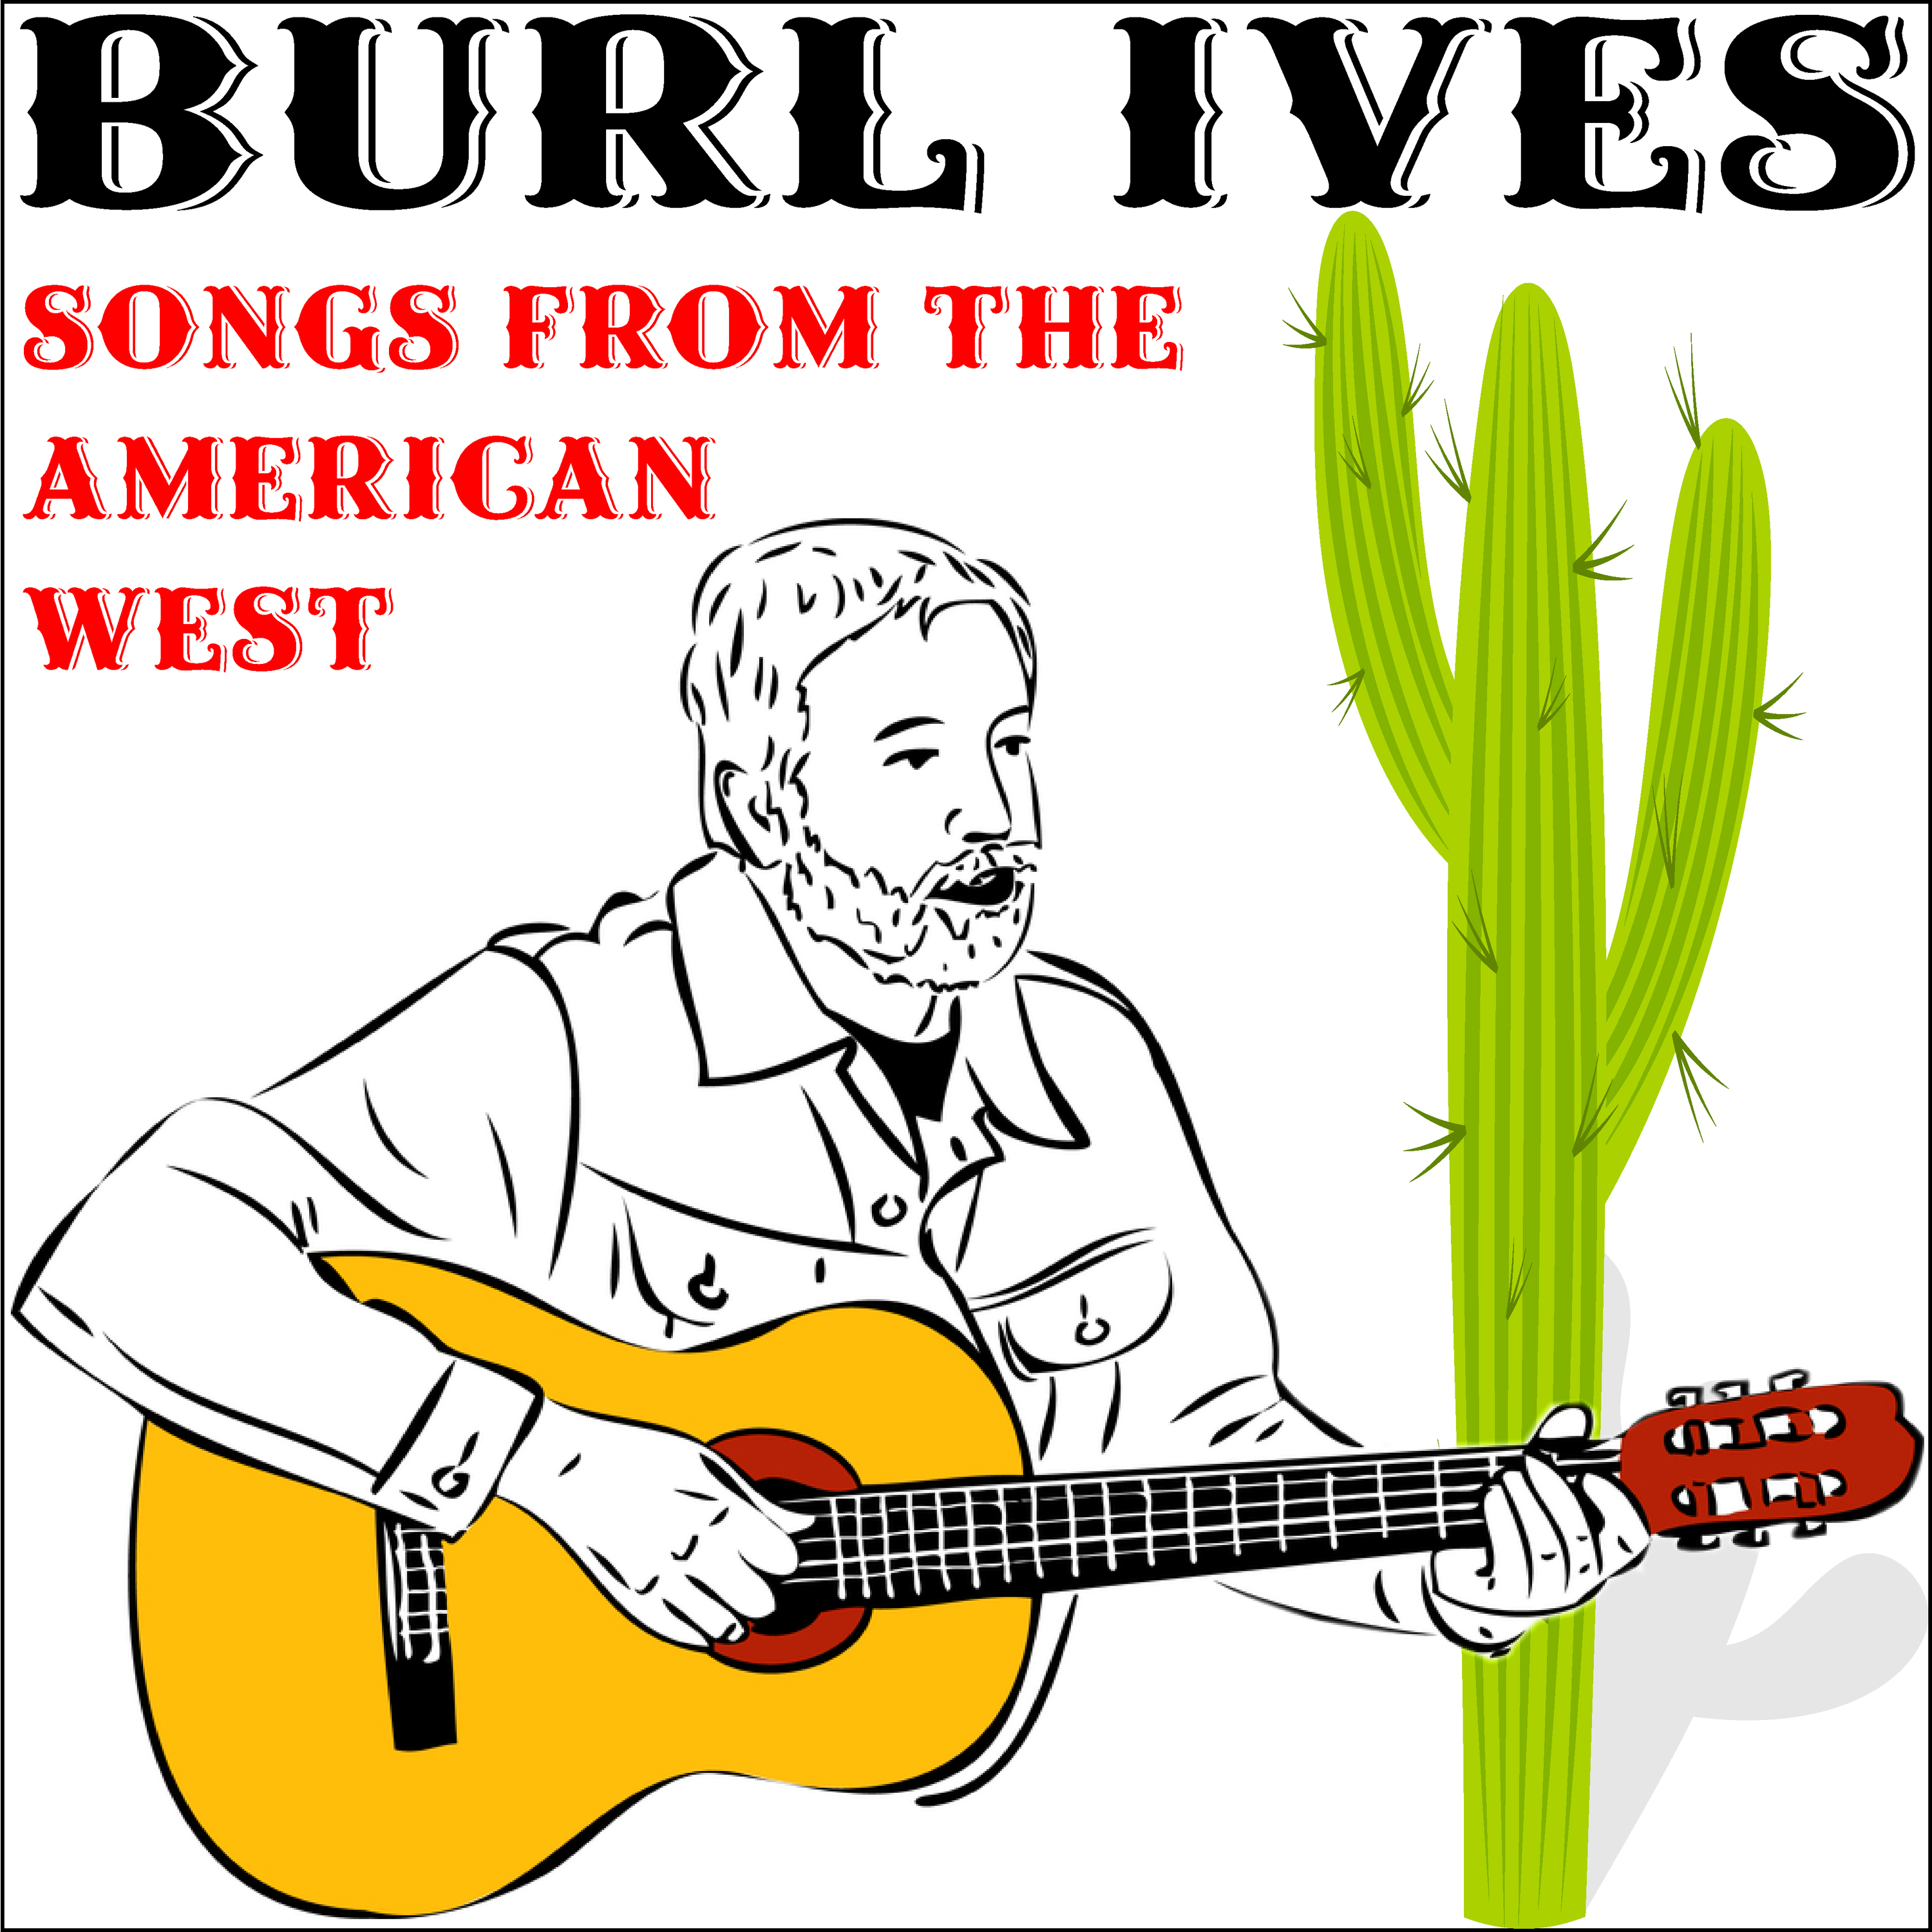 Songs from the American West